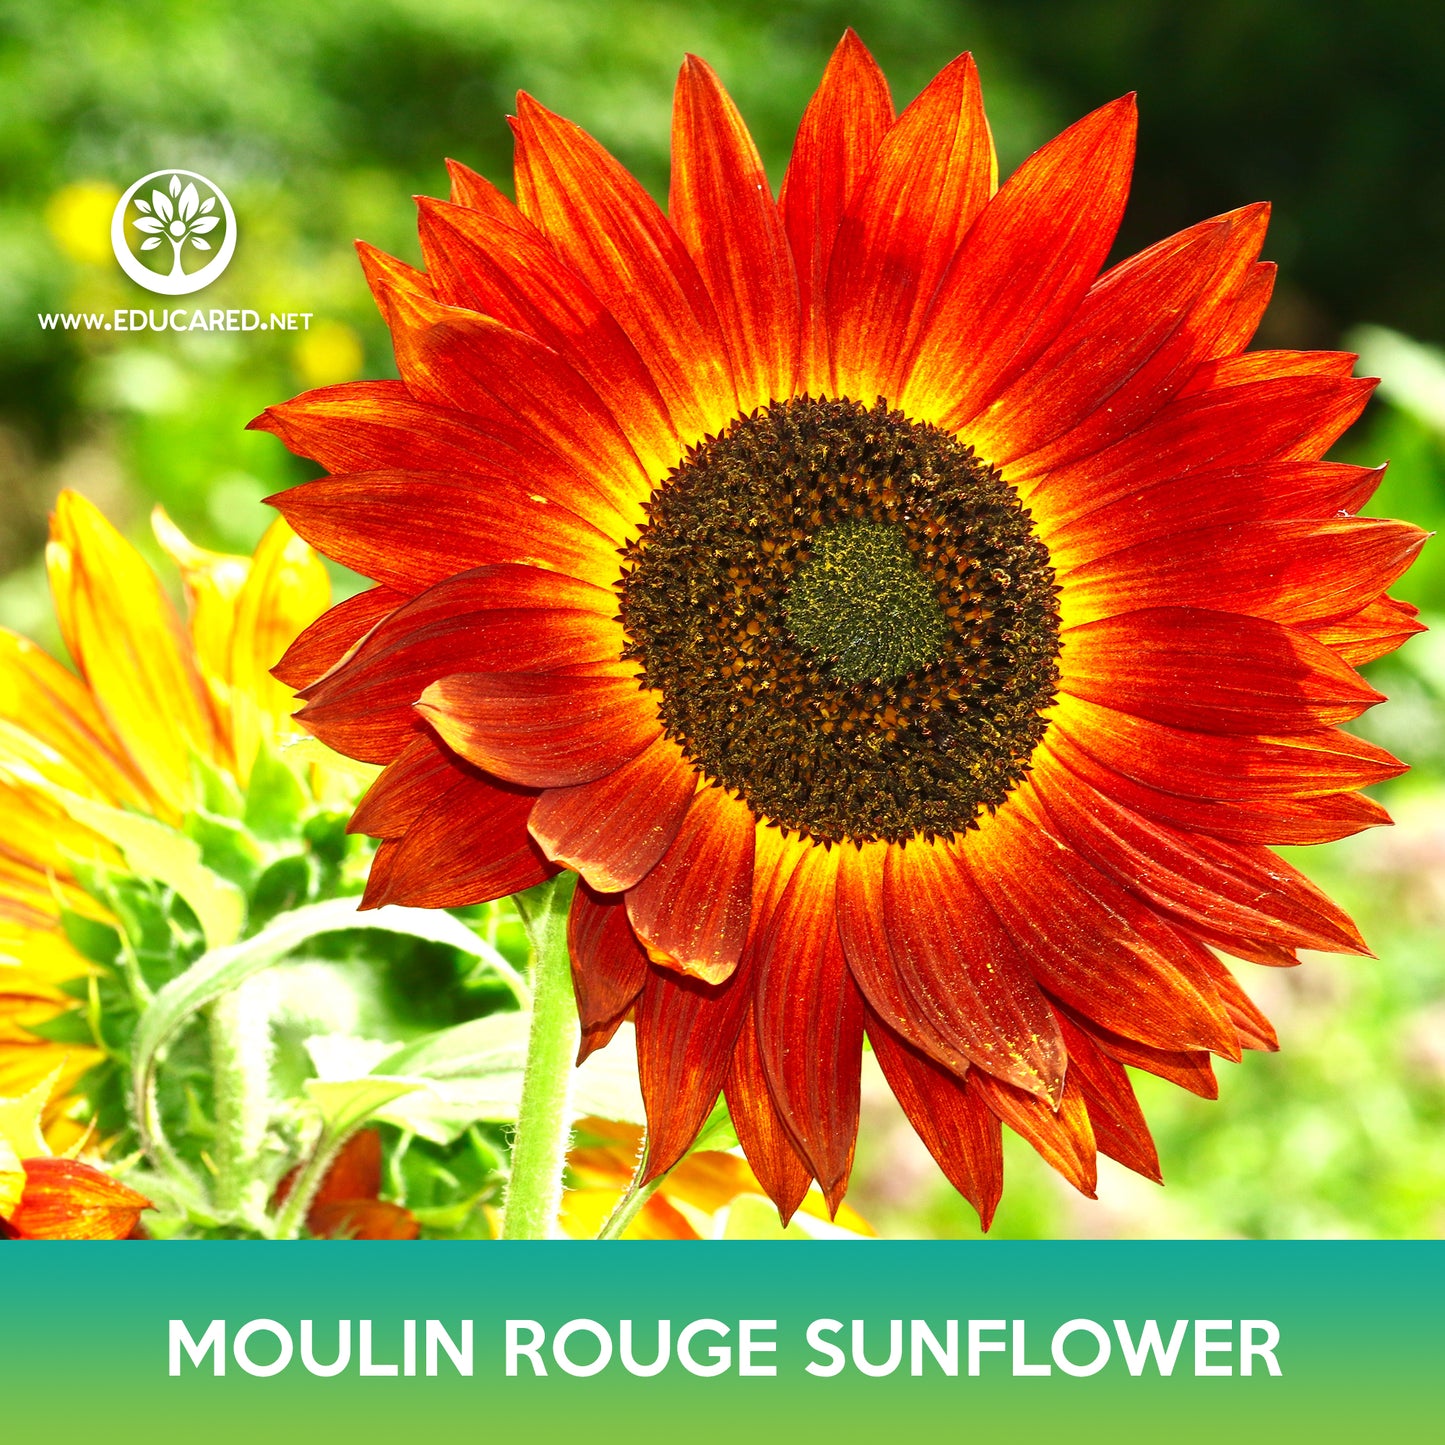 Moulin Rouge Sunflower Seed, Red Sunflower